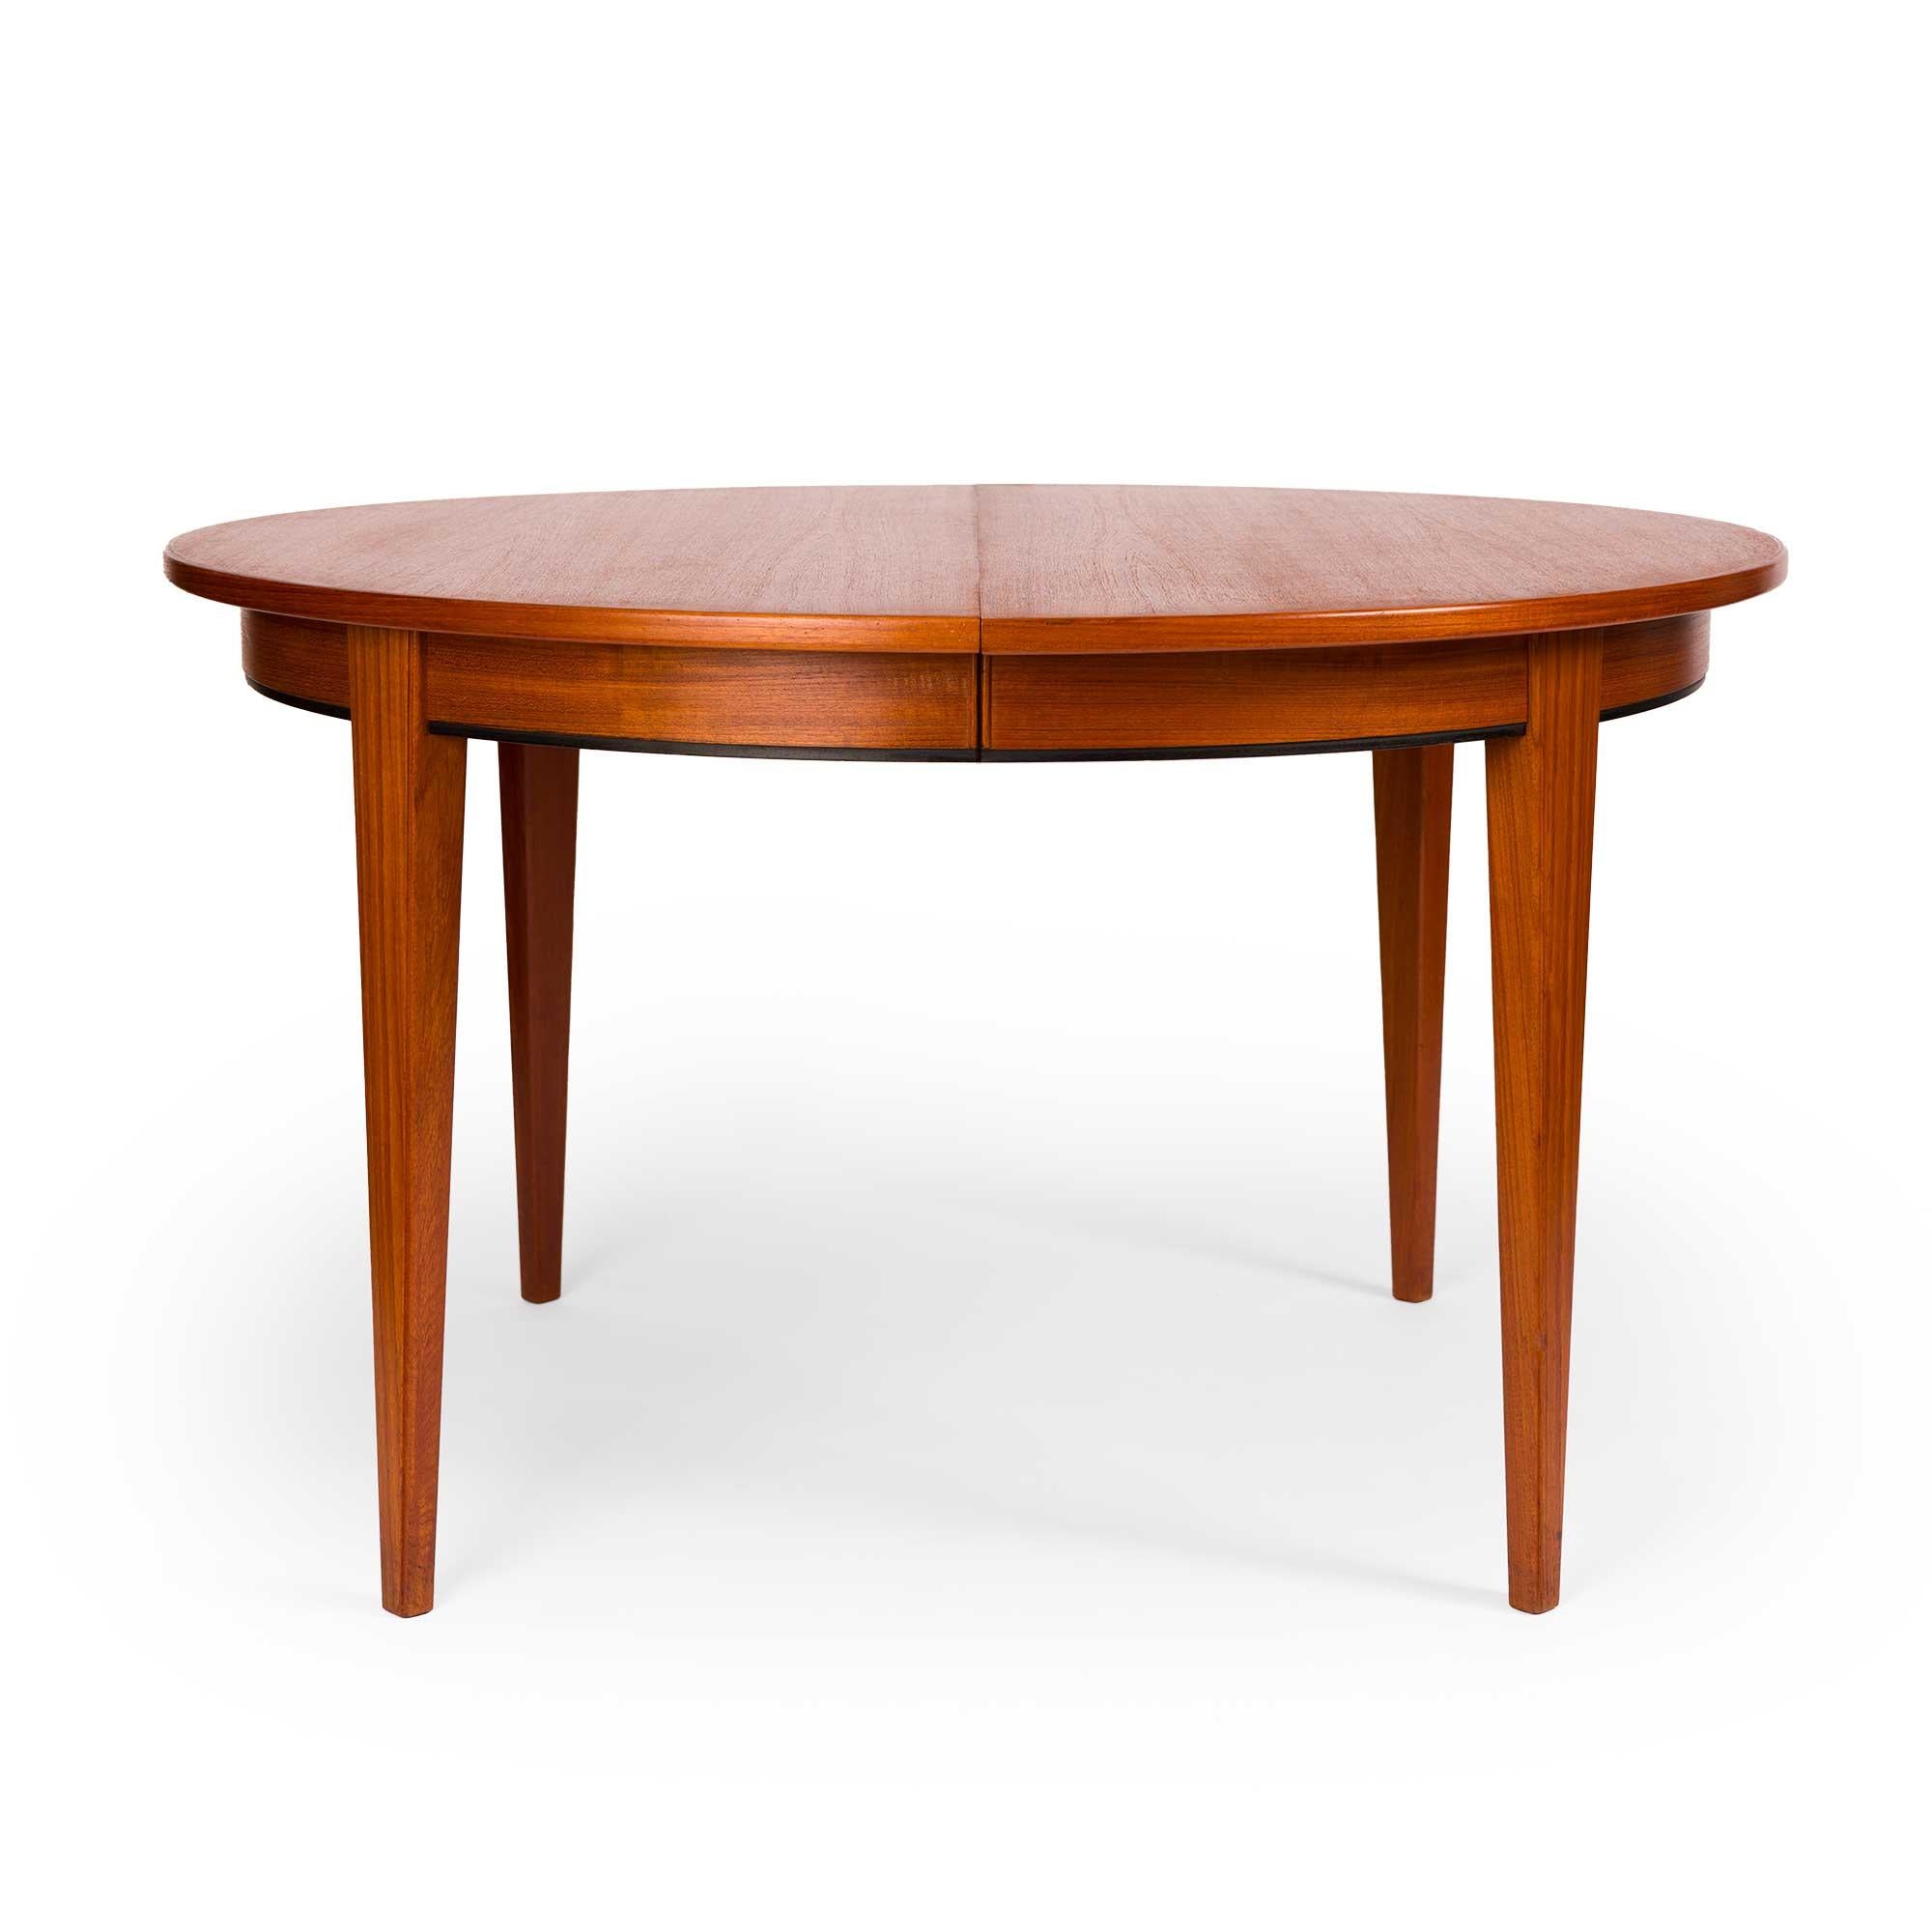 This vintage Danish mid-century teak dining table is an iconic design from the 60s. Model #55 was designed and crafted by Omann Jun for Gunni Omann. Gunni Omann was a Danish furniture designer and cabinetmaker known for his contributions to